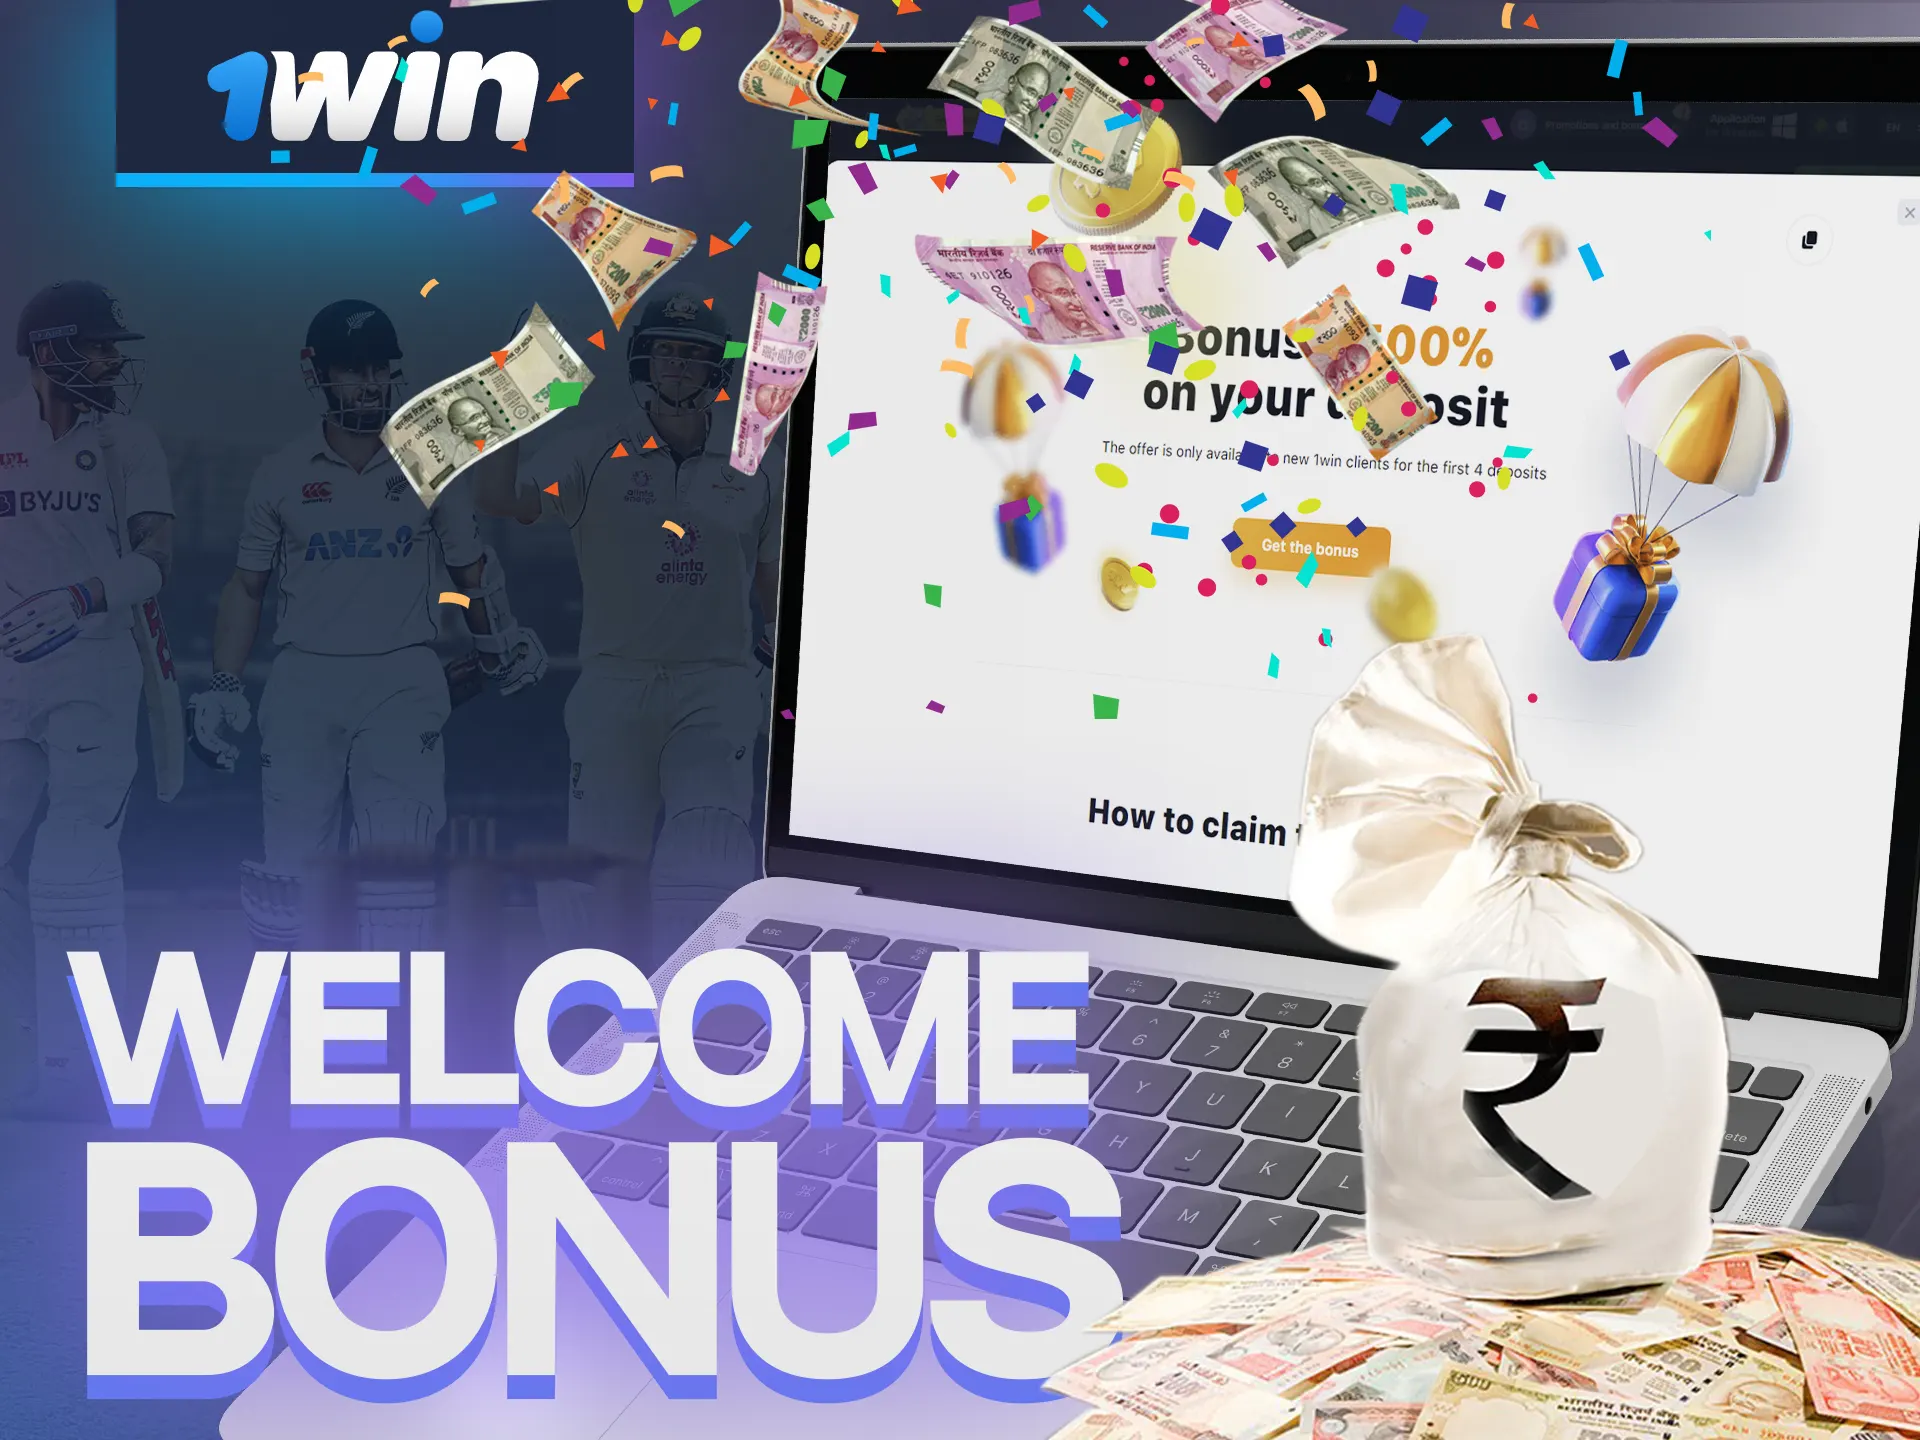 Newcomers get welcome sports bonuses at 1win.